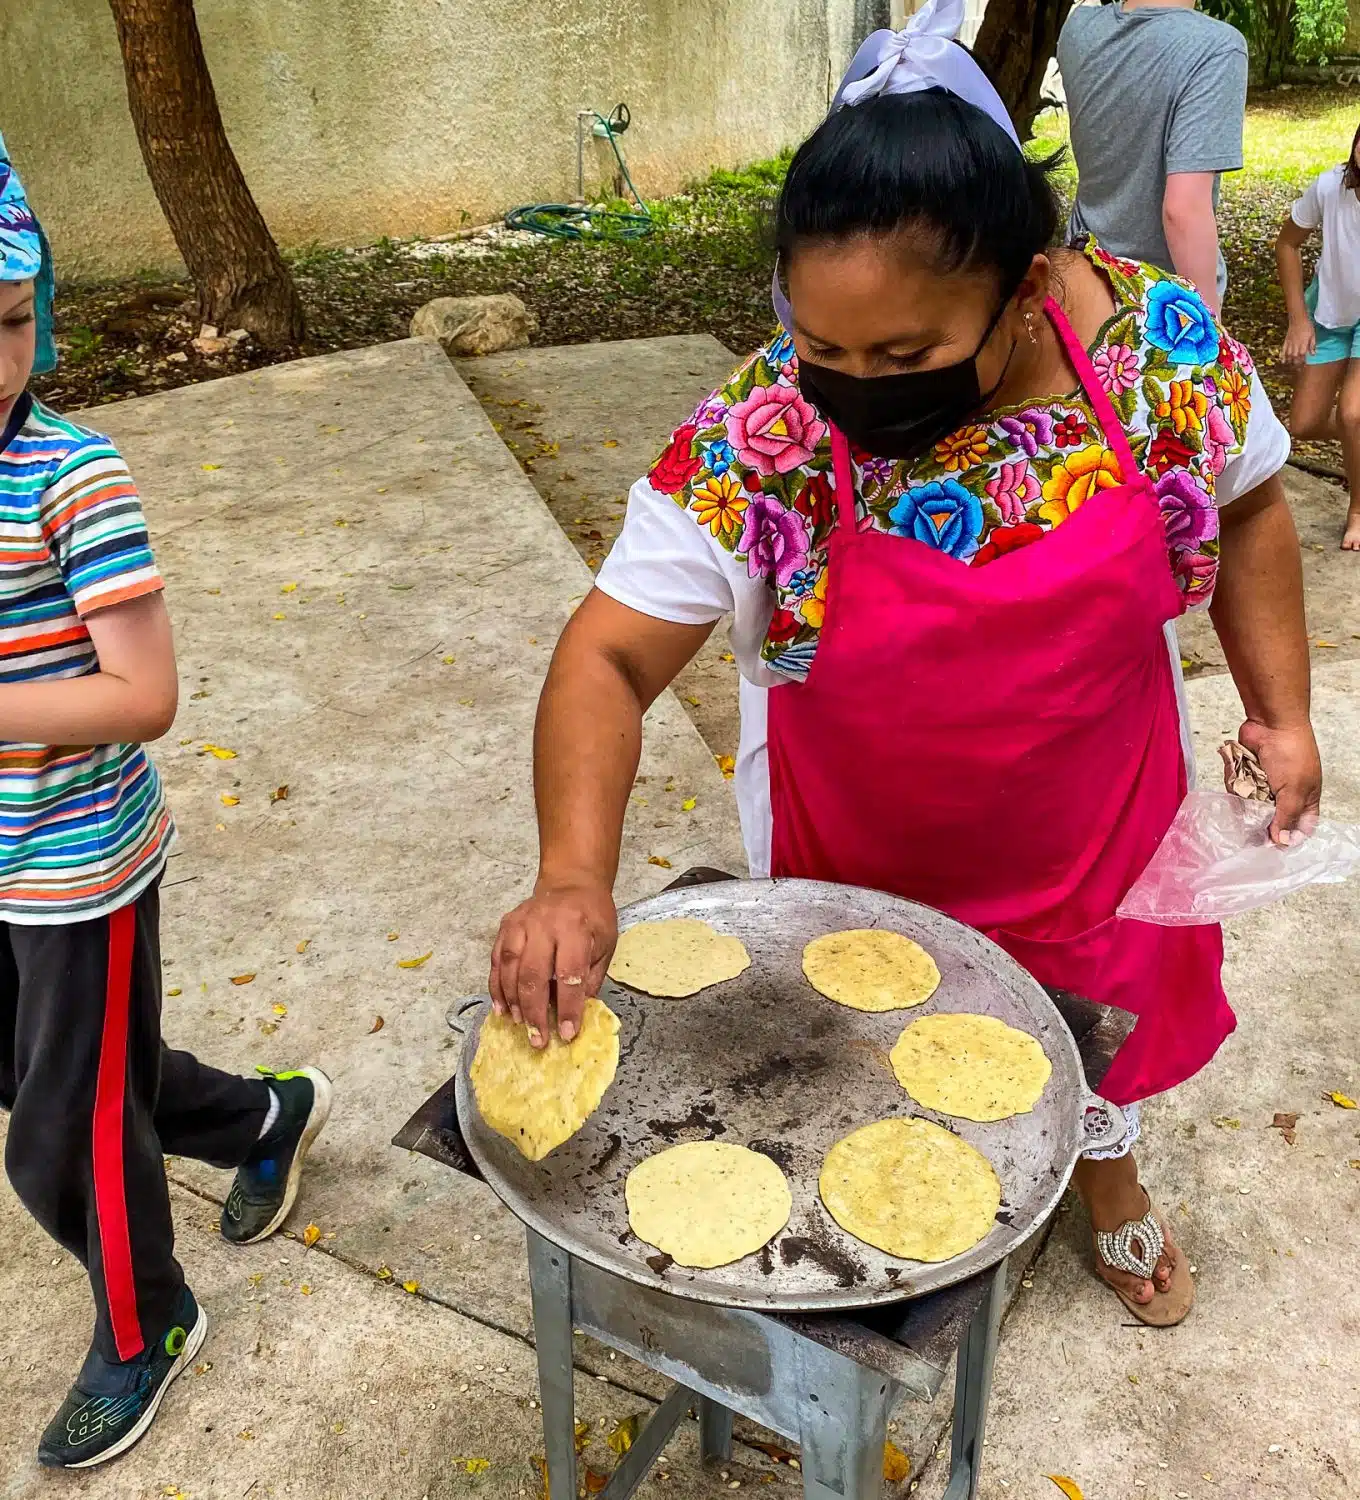 The wonderful chef, Karla, demonstrating how to make tortillas.